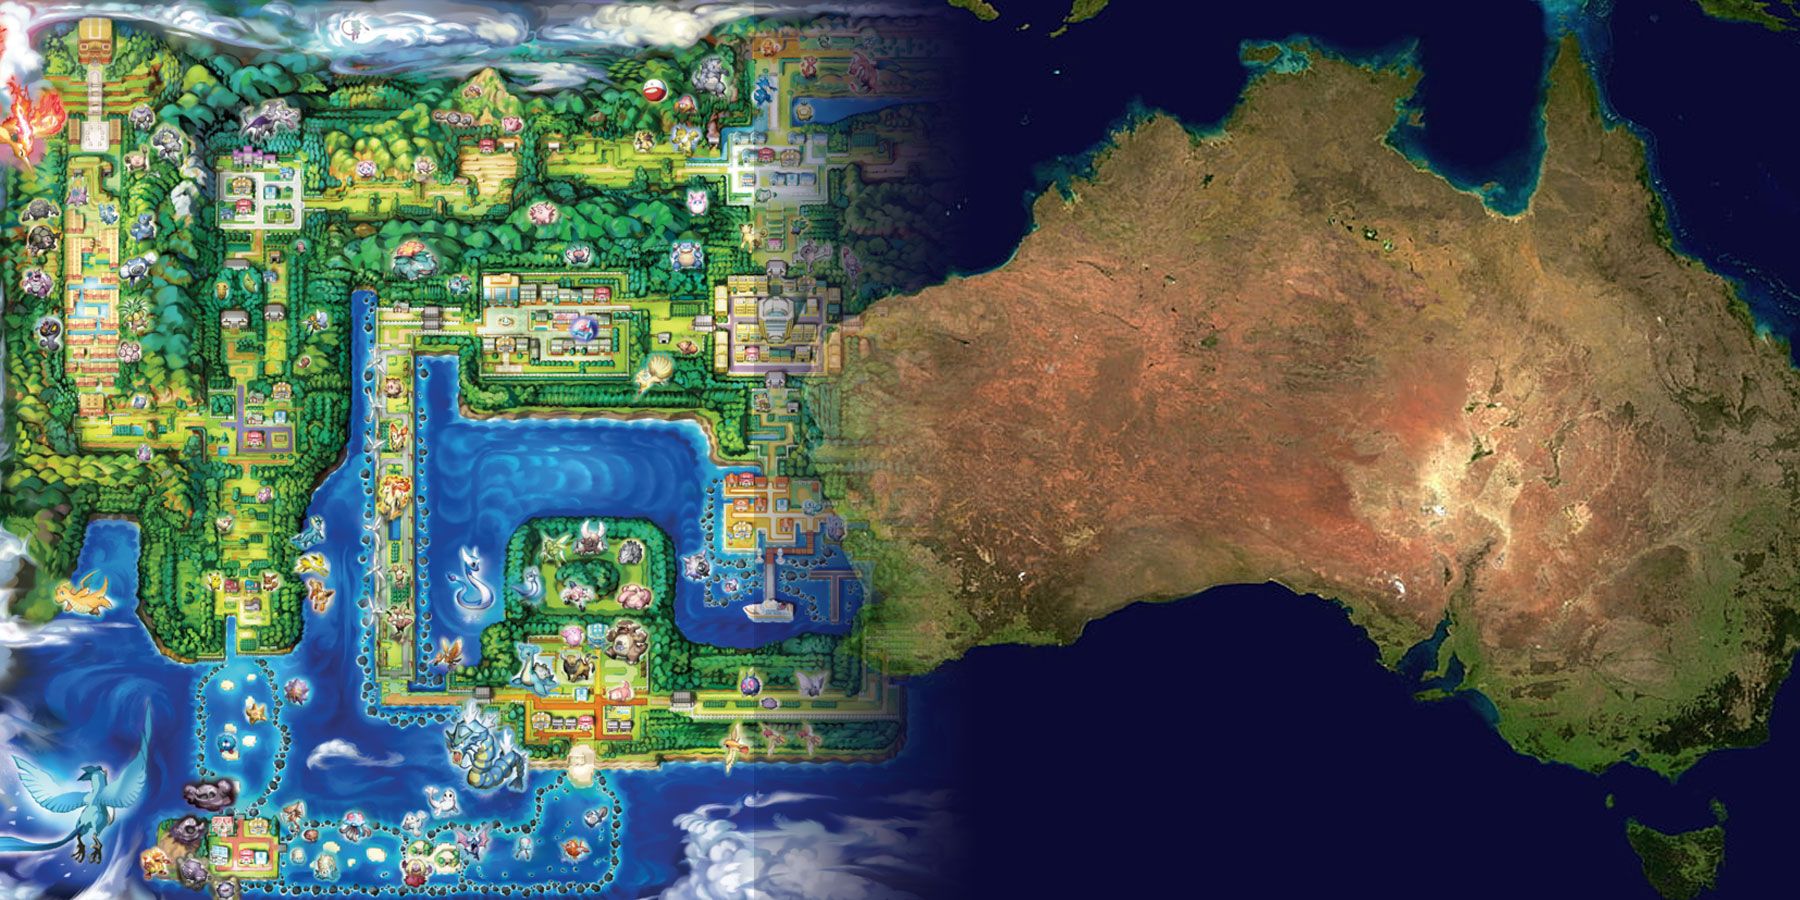 Australia Could Be the Perfect Setting for a New Pokemon Game